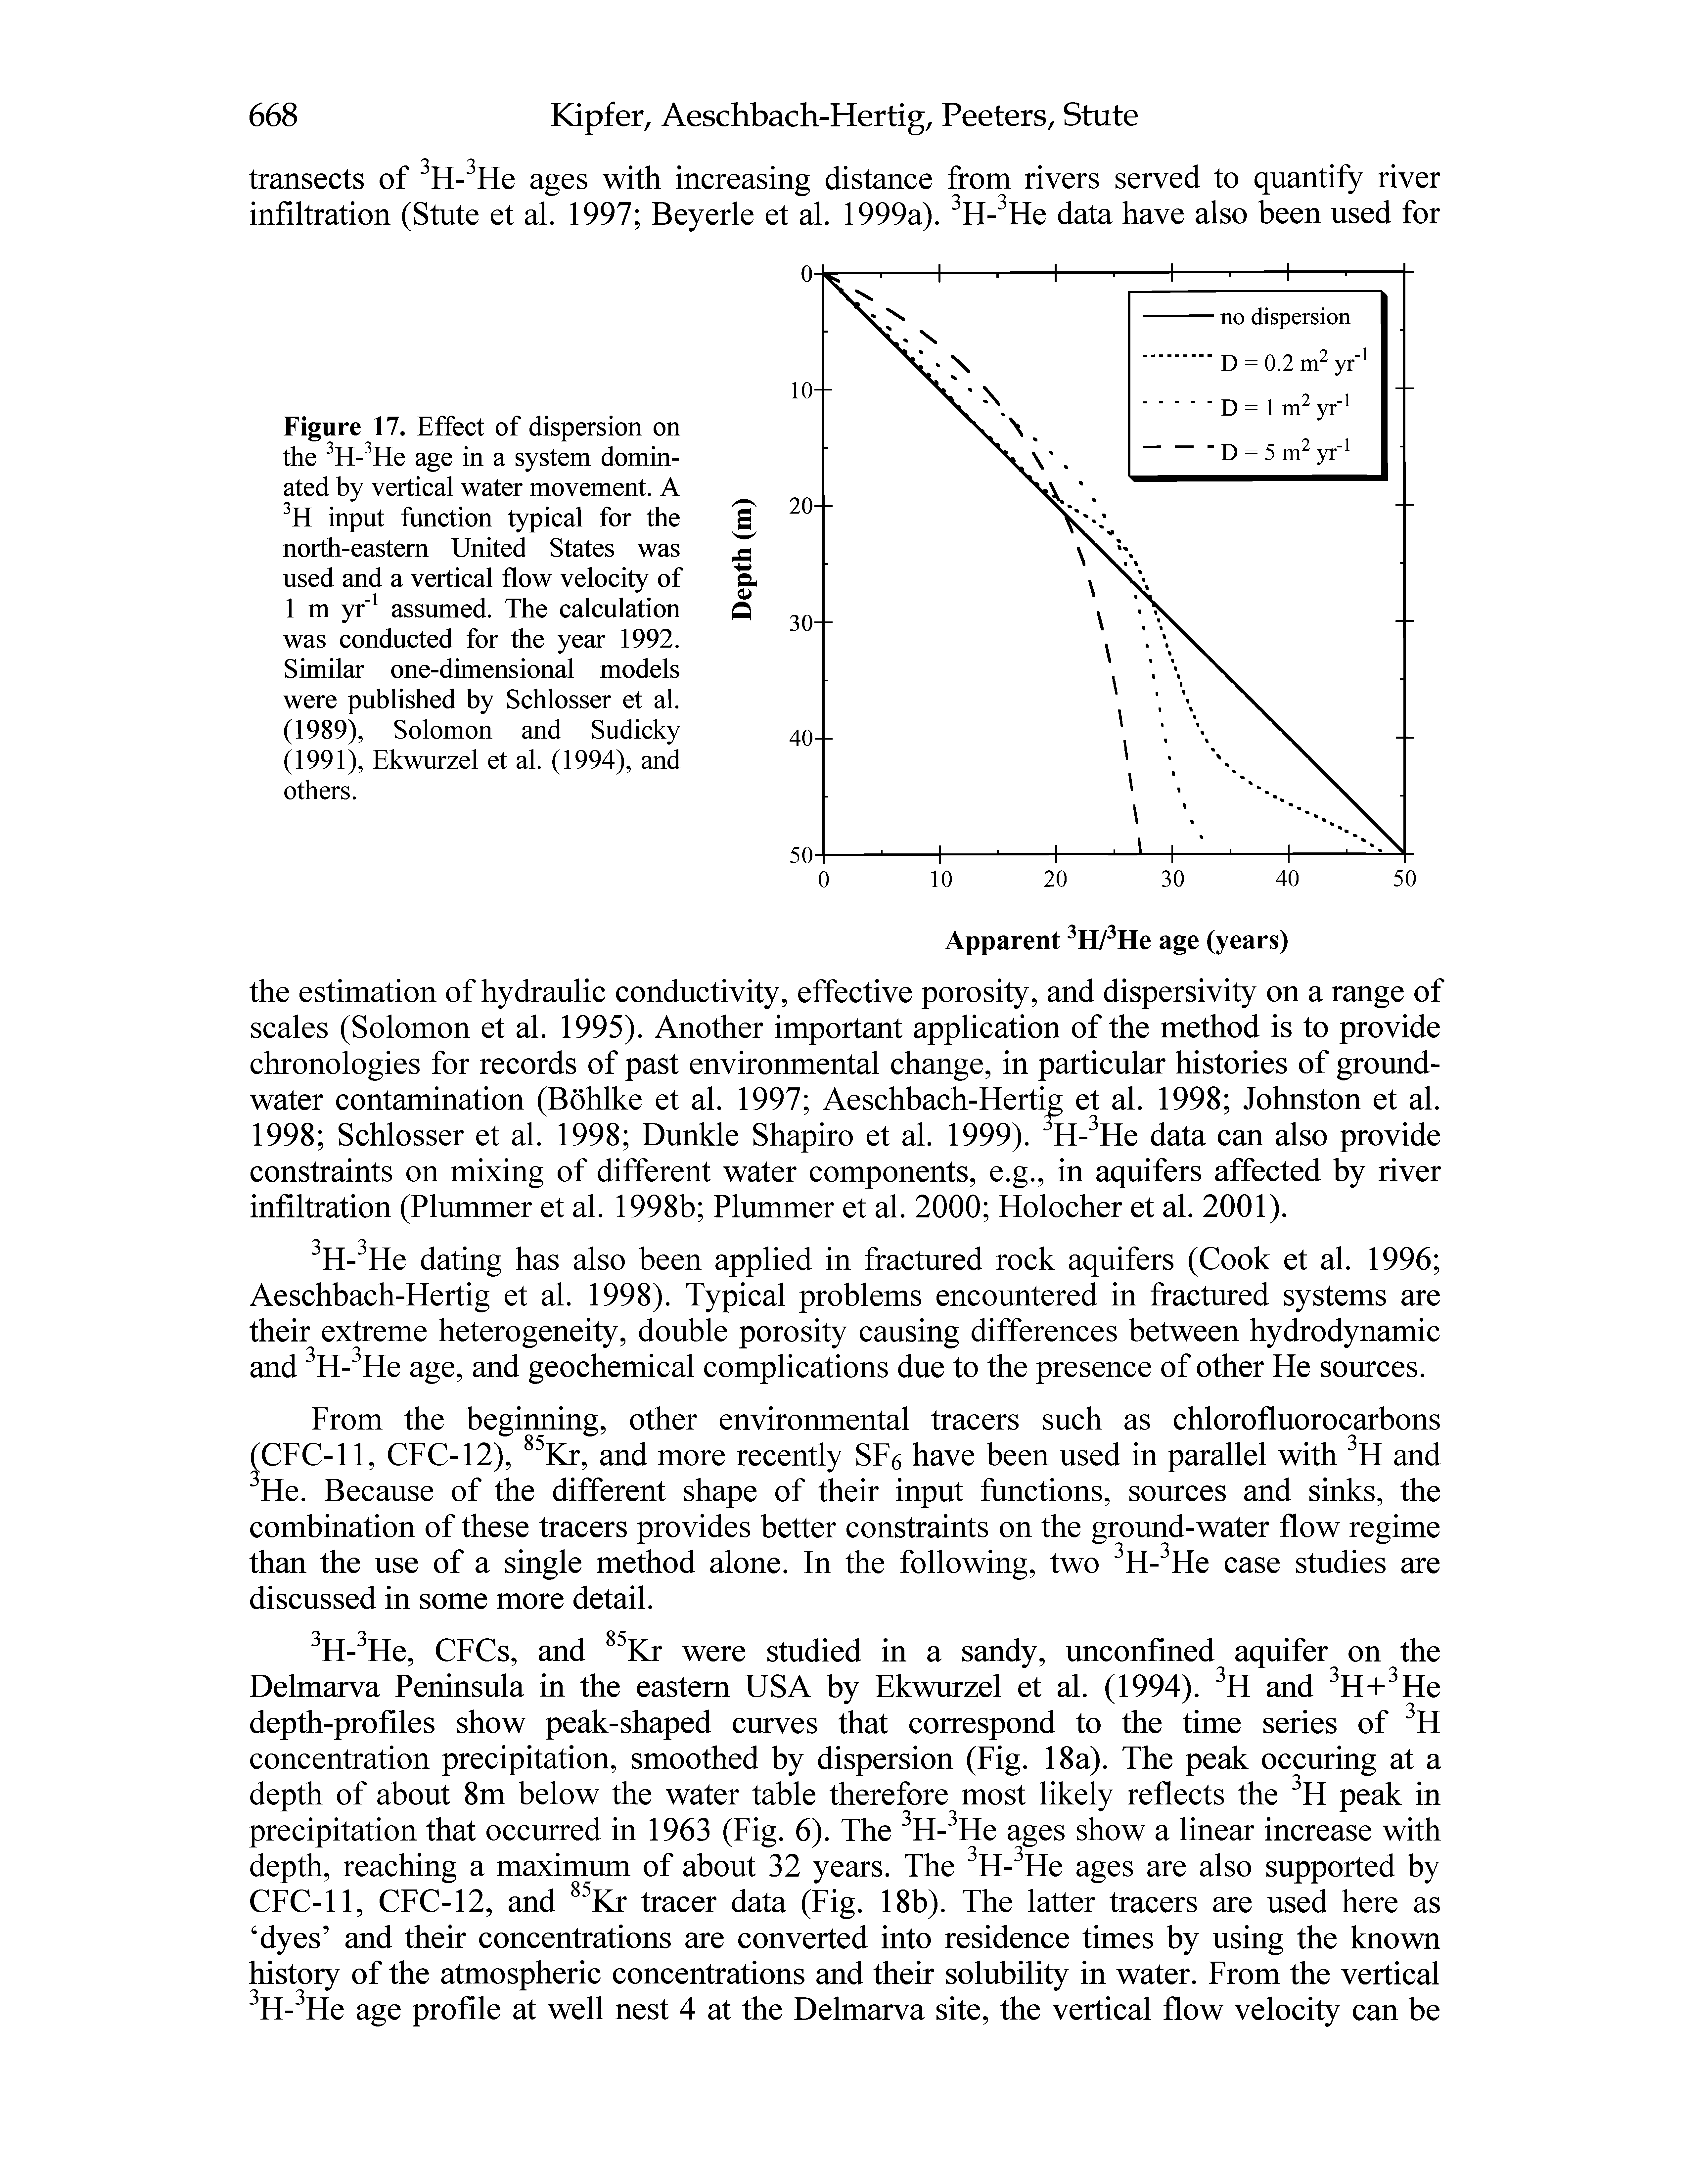 Figure 17. Effect of dispersion on the H- He age in a system dominated by vertical water movement. A input function typical for the north-eastern United States was used and a vertical flow velocity of 1 m yr assumed. The calculation was conducted for the year 1992. Similar one-dimensional models were published by Schlosser et al.